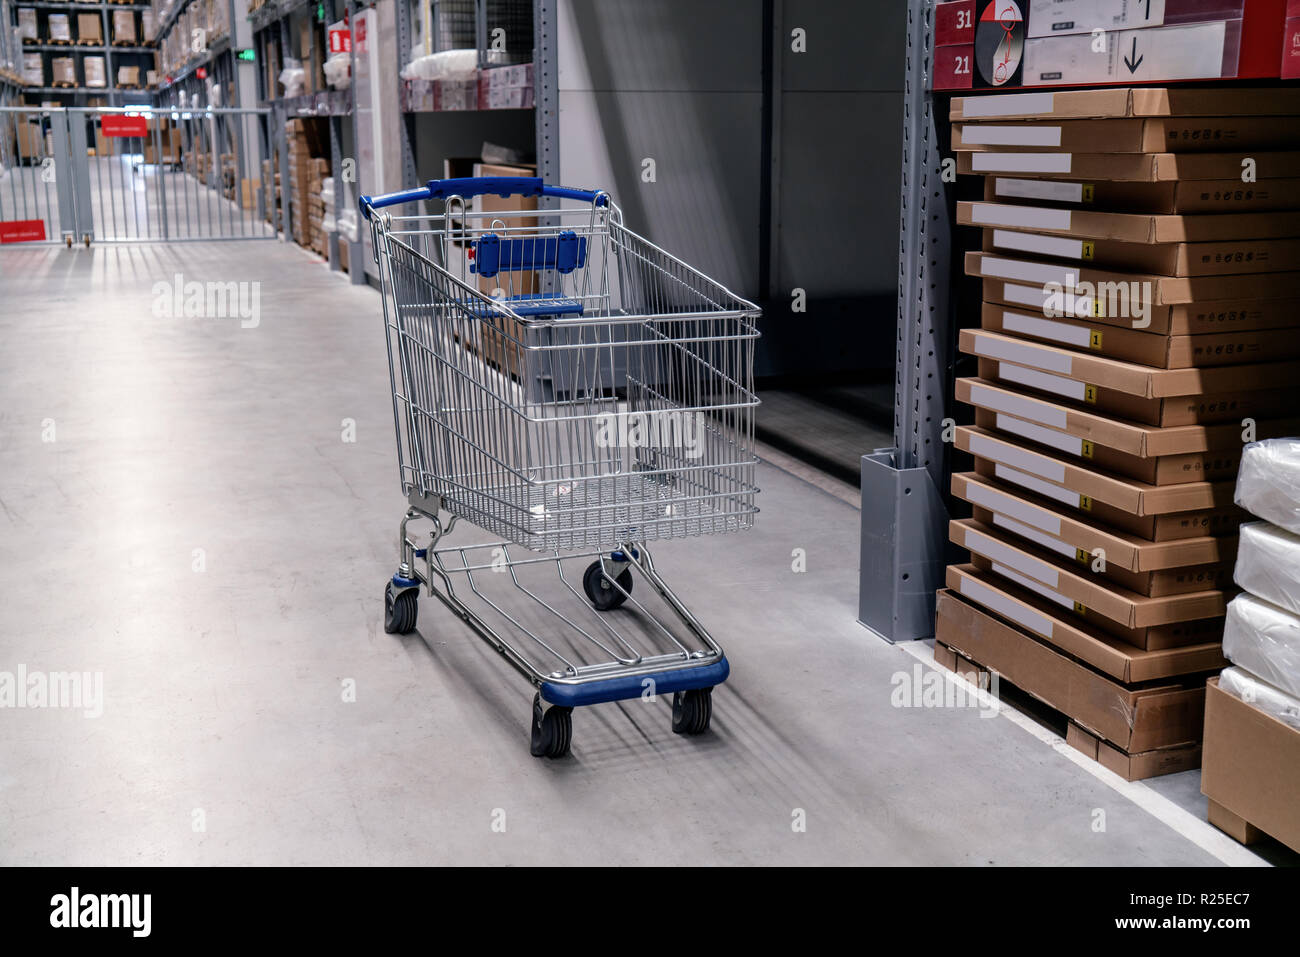 Industrial warehouses, packaging boxes and shelves Stock Photo